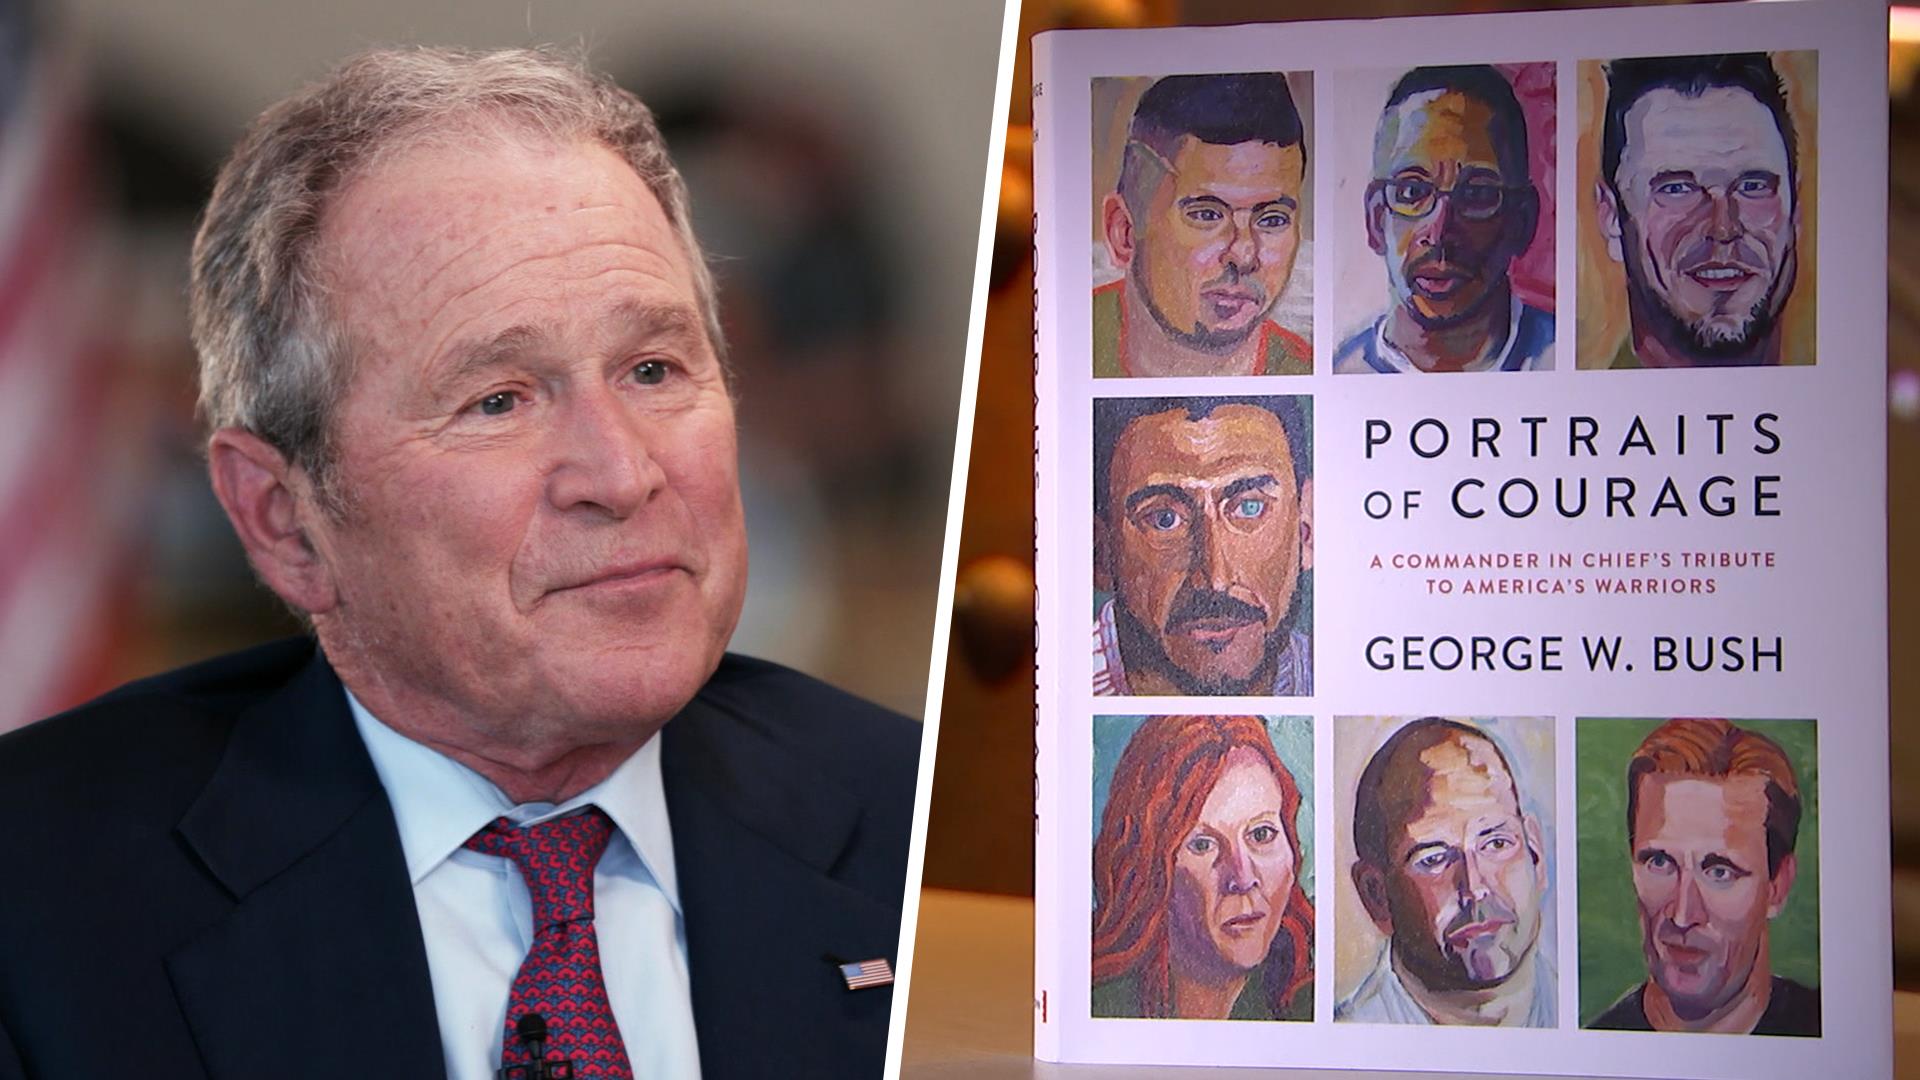 George W. Bush: 'Portraits of Courage' is 'a wonderful opportunity to honor those who served'